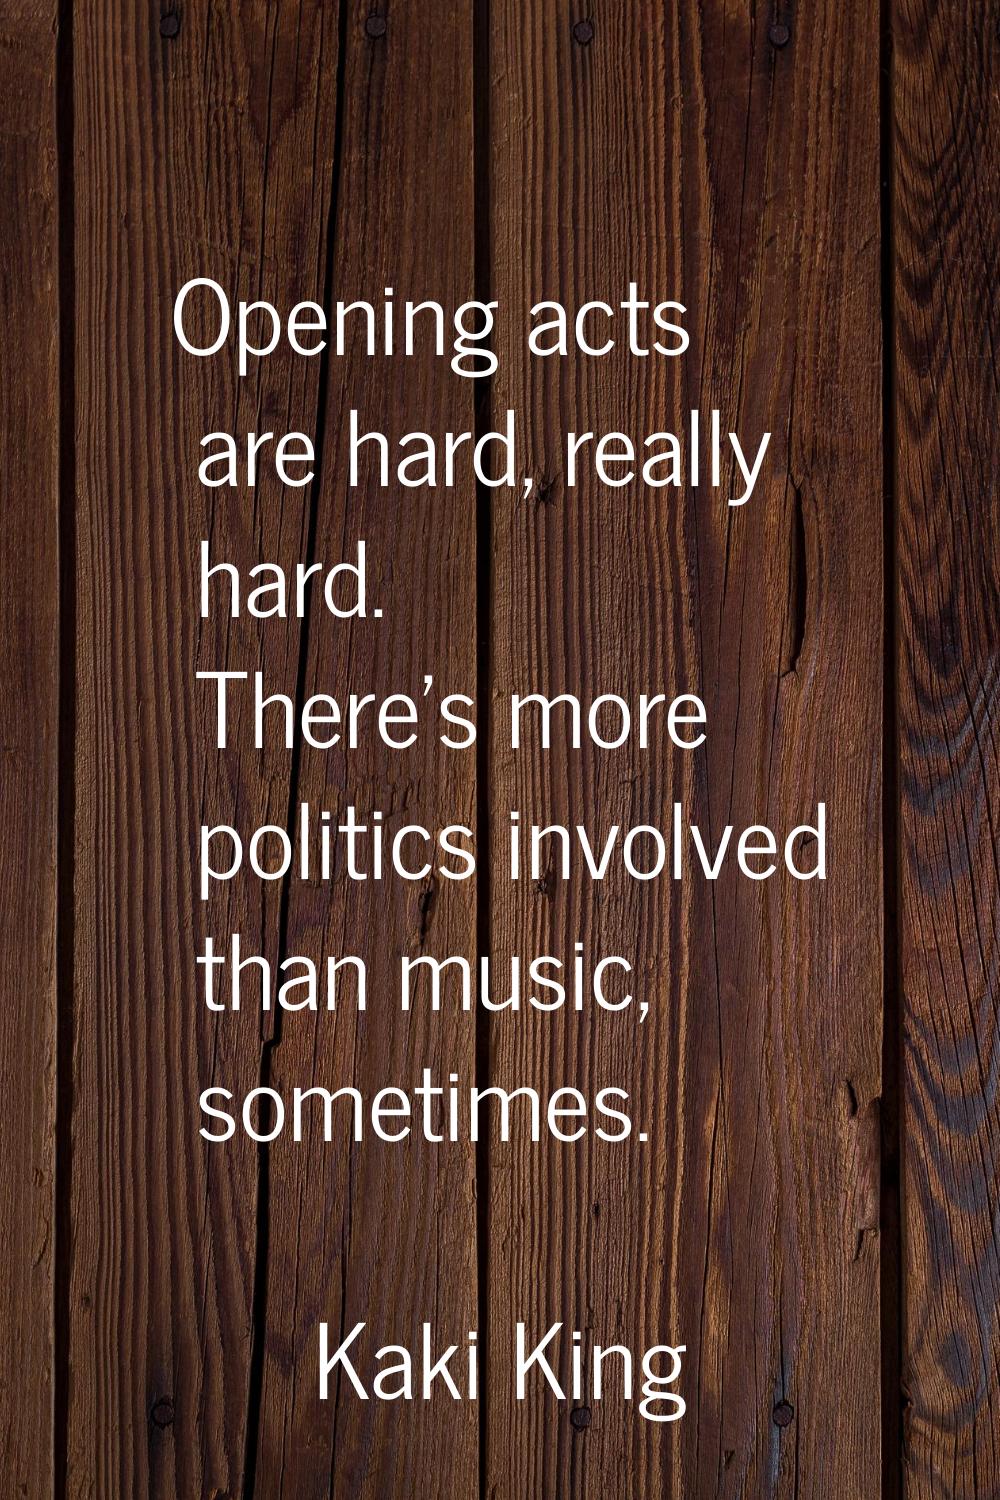 Opening acts are hard, really hard. There's more politics involved than music, sometimes.